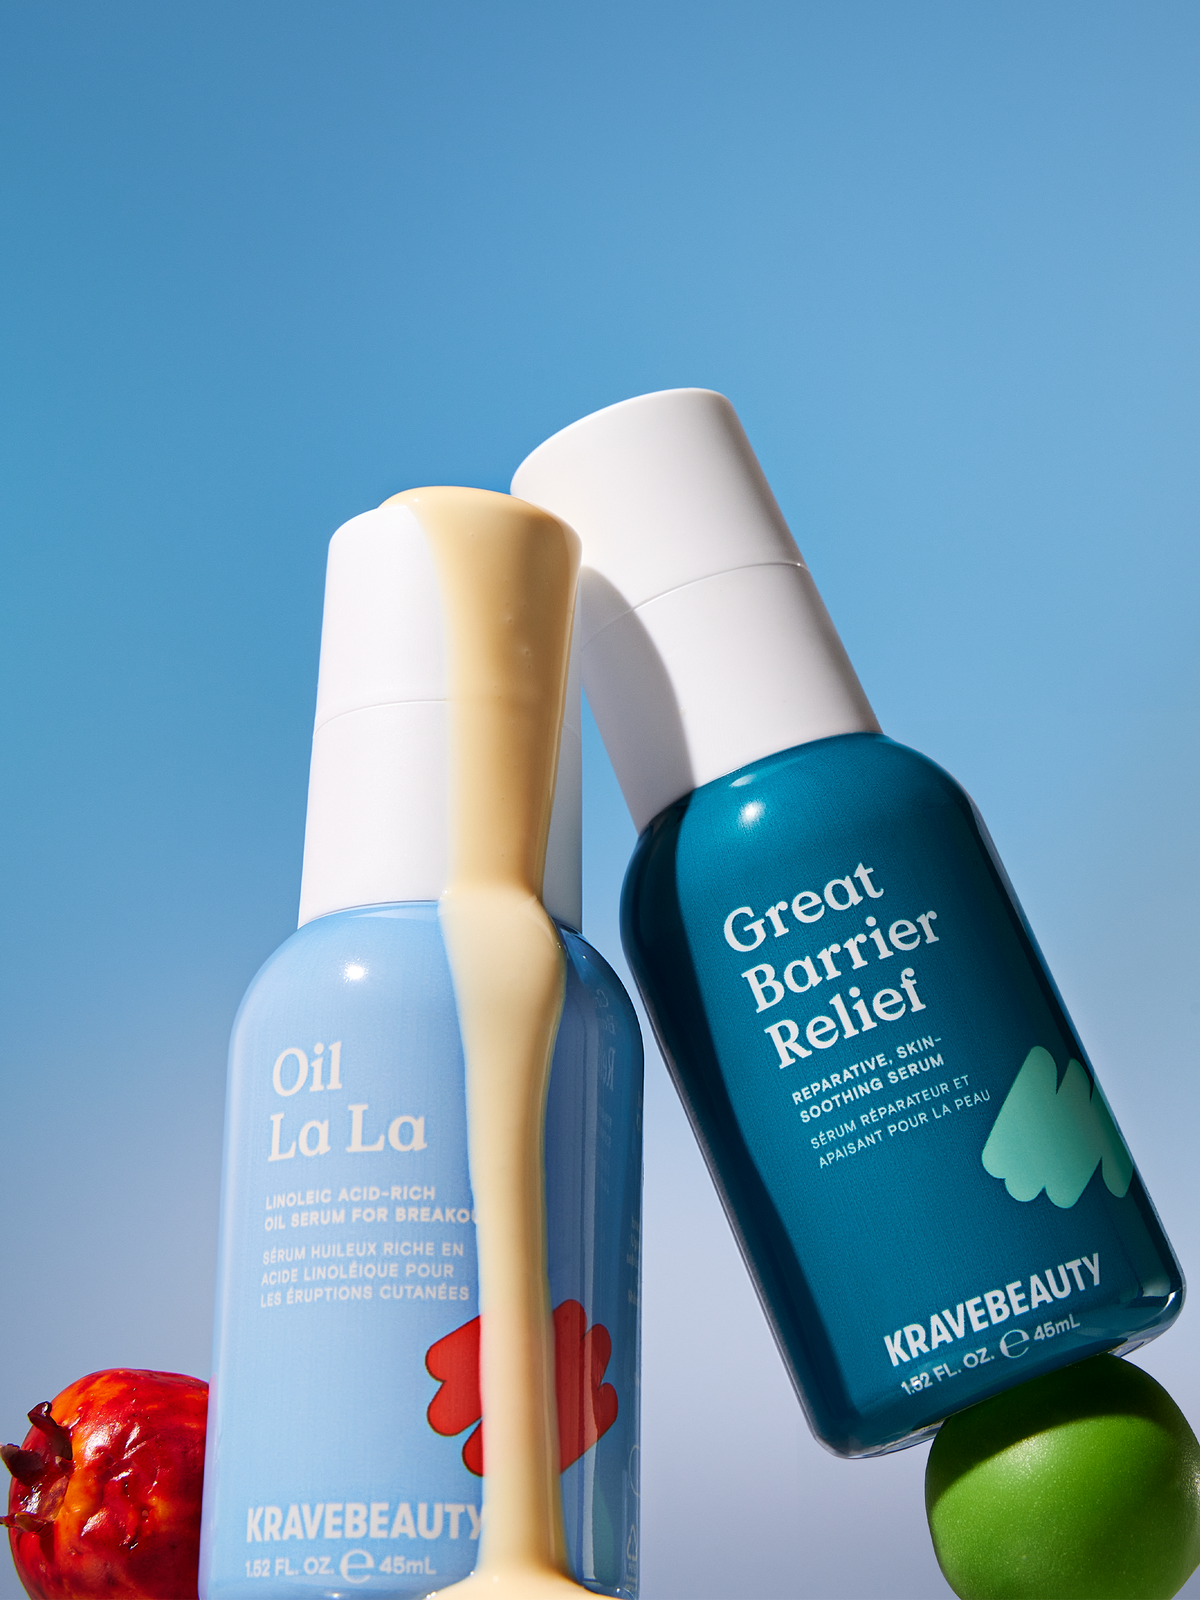 Picture Pore-Fect Duo featuring Oil La La and Great Barrier Relief